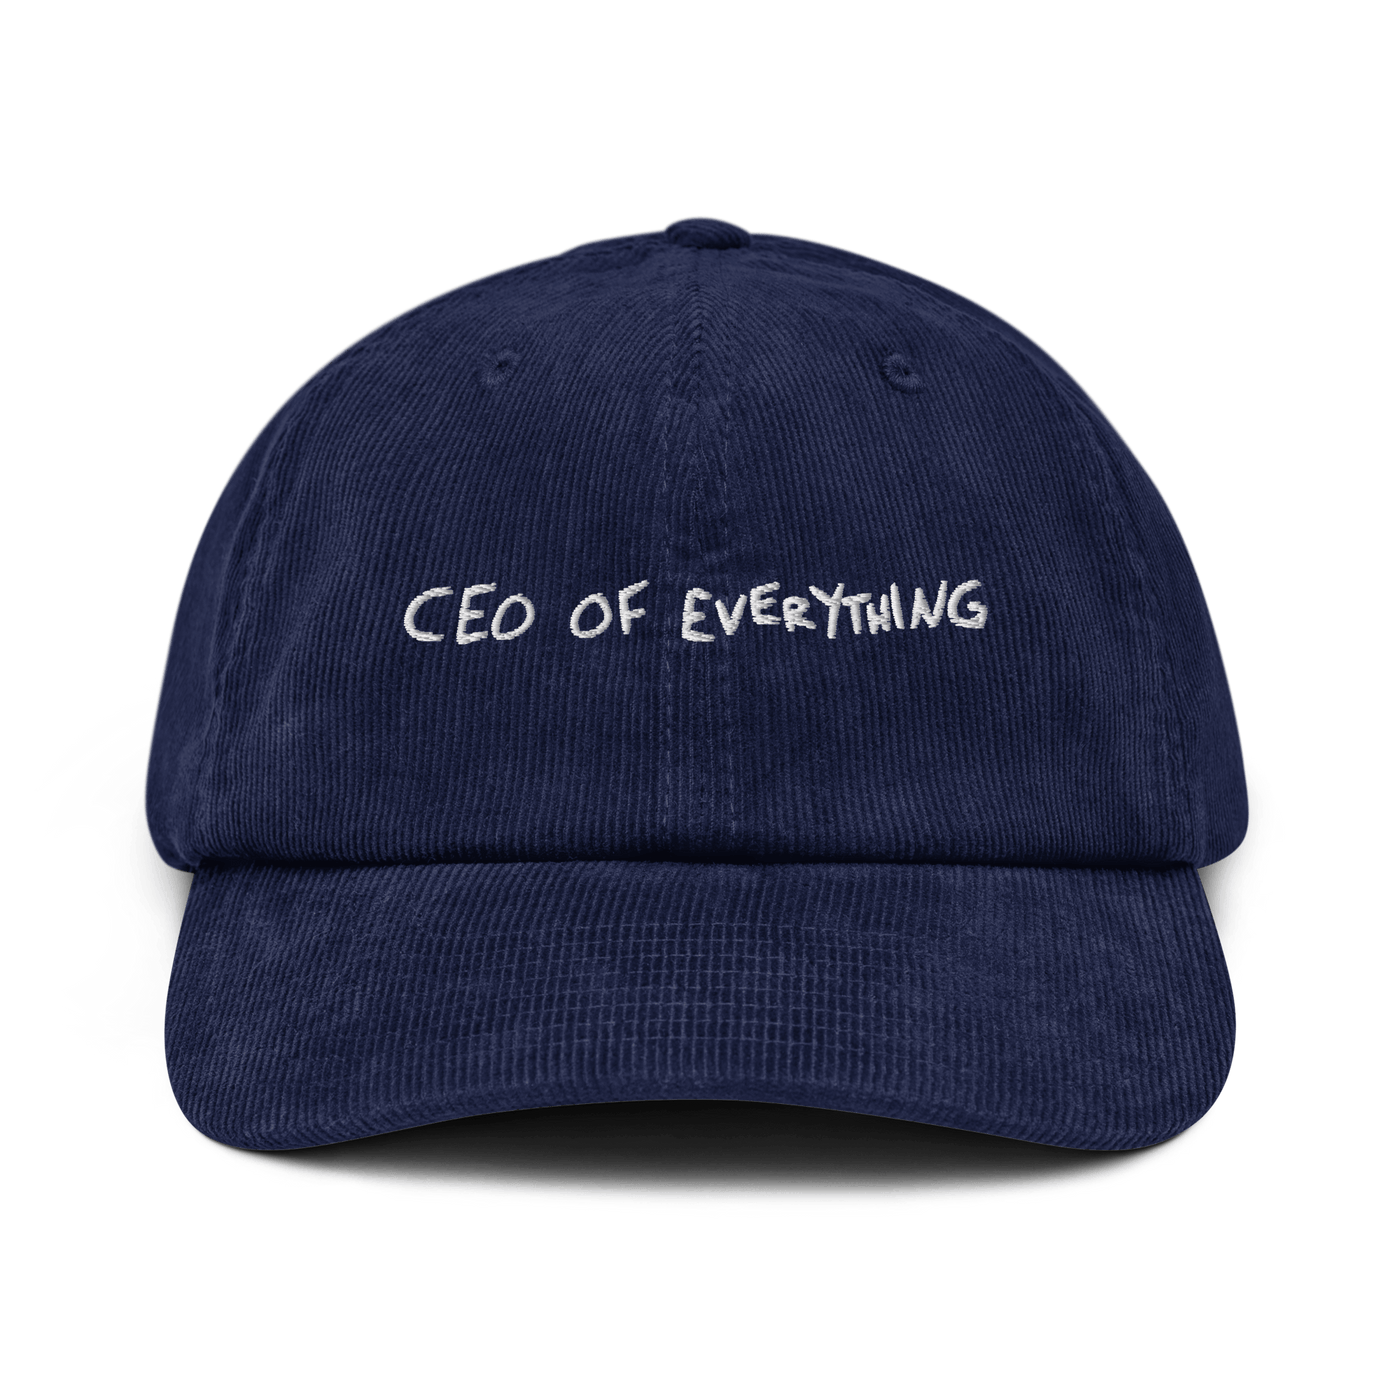 CEO of everything Corduroy hat - Black - - Just Another Cap Store